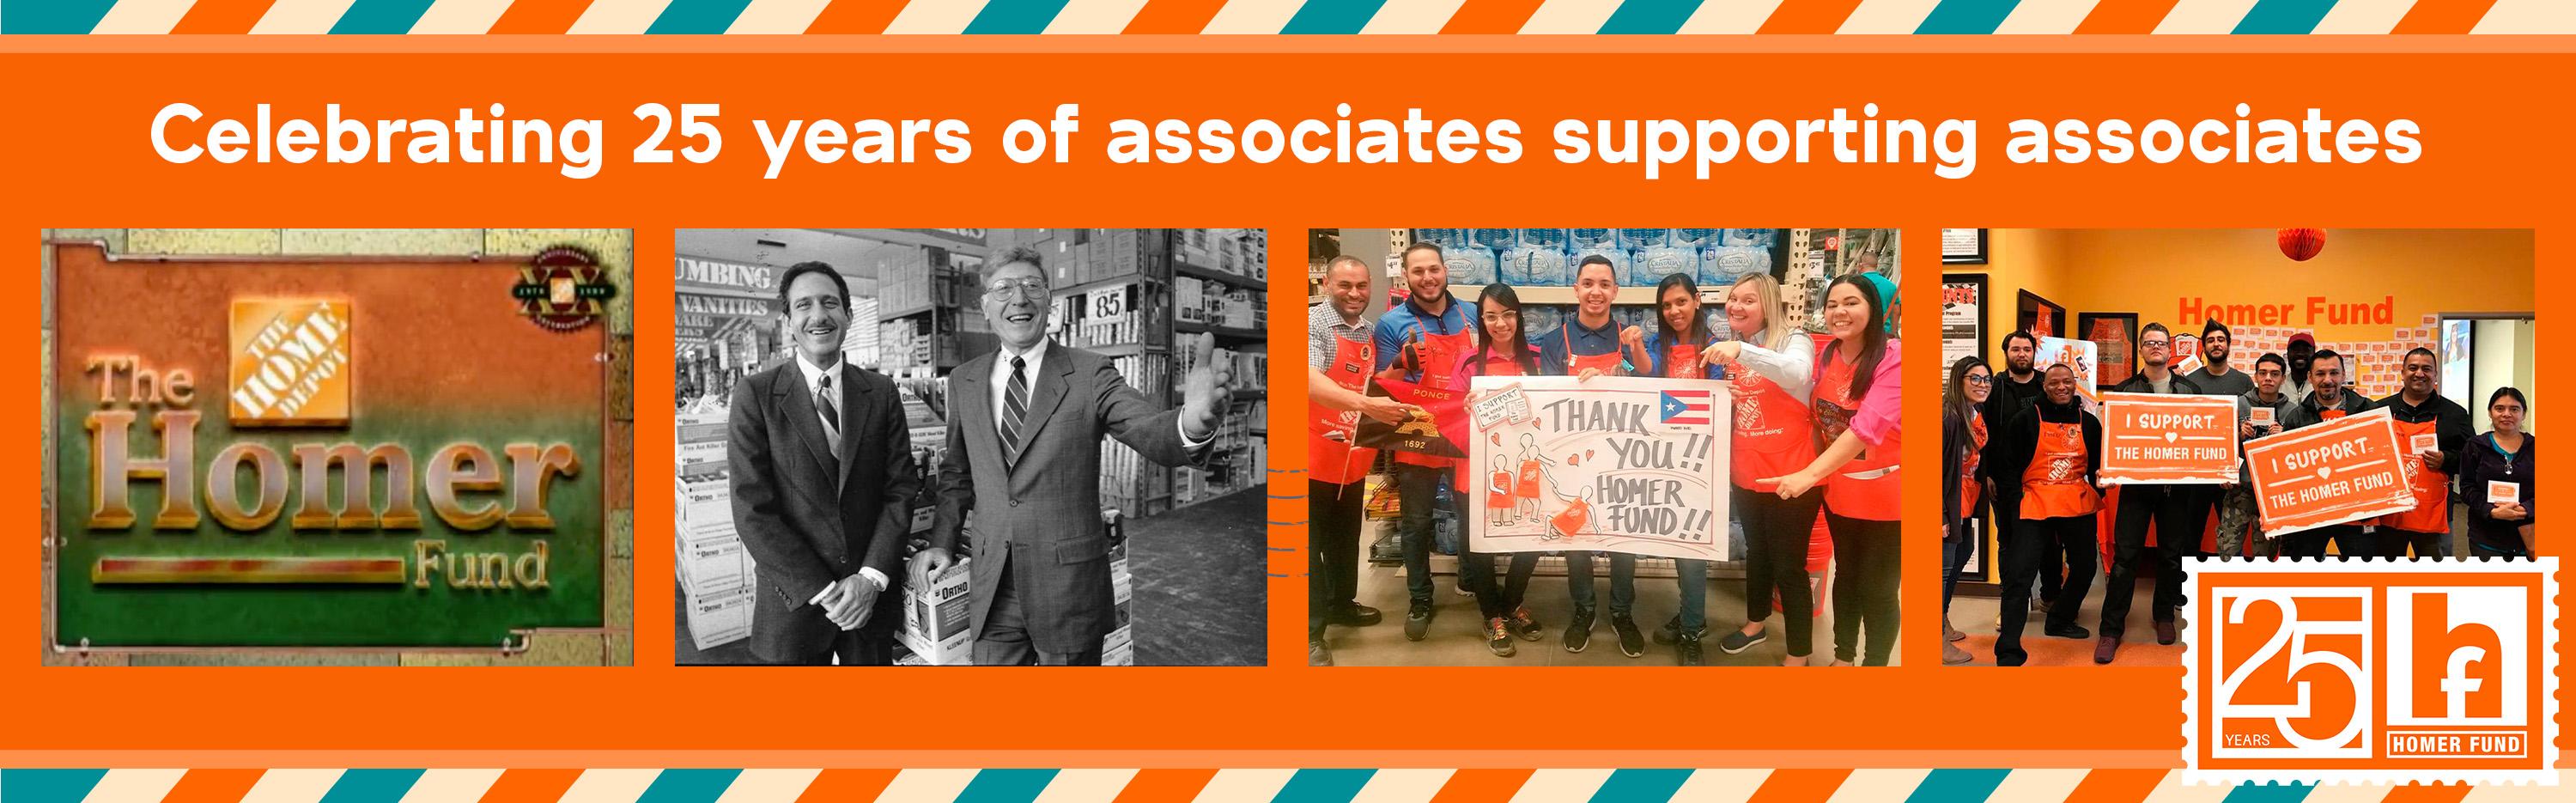 Four historical photos from the Homer Fund